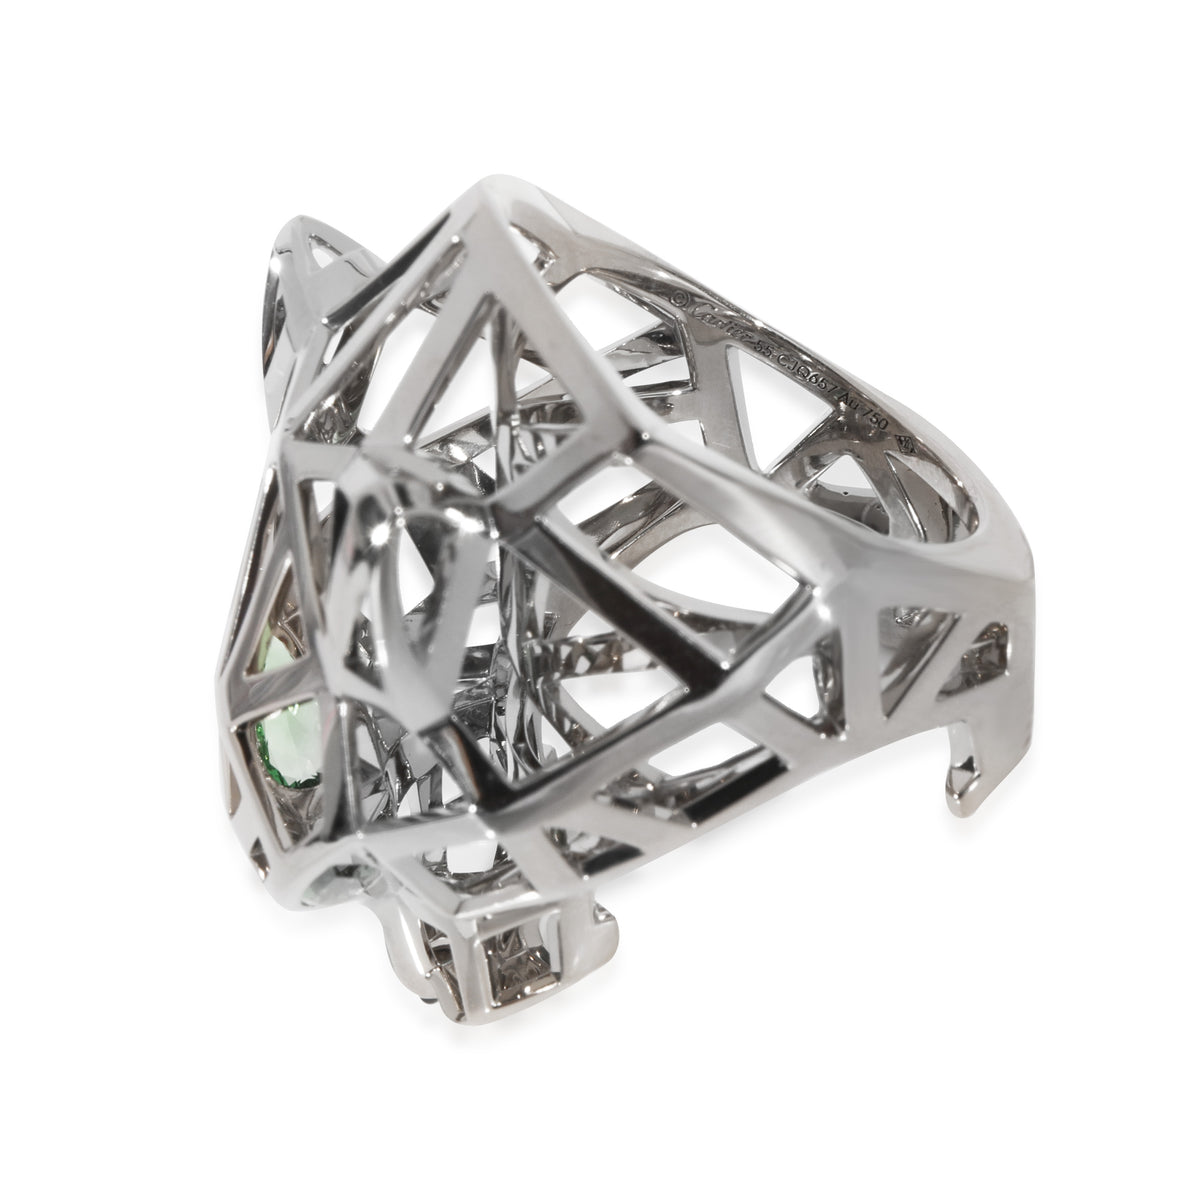 Cartier Panthere De Cartier Ring in 18k White Gold